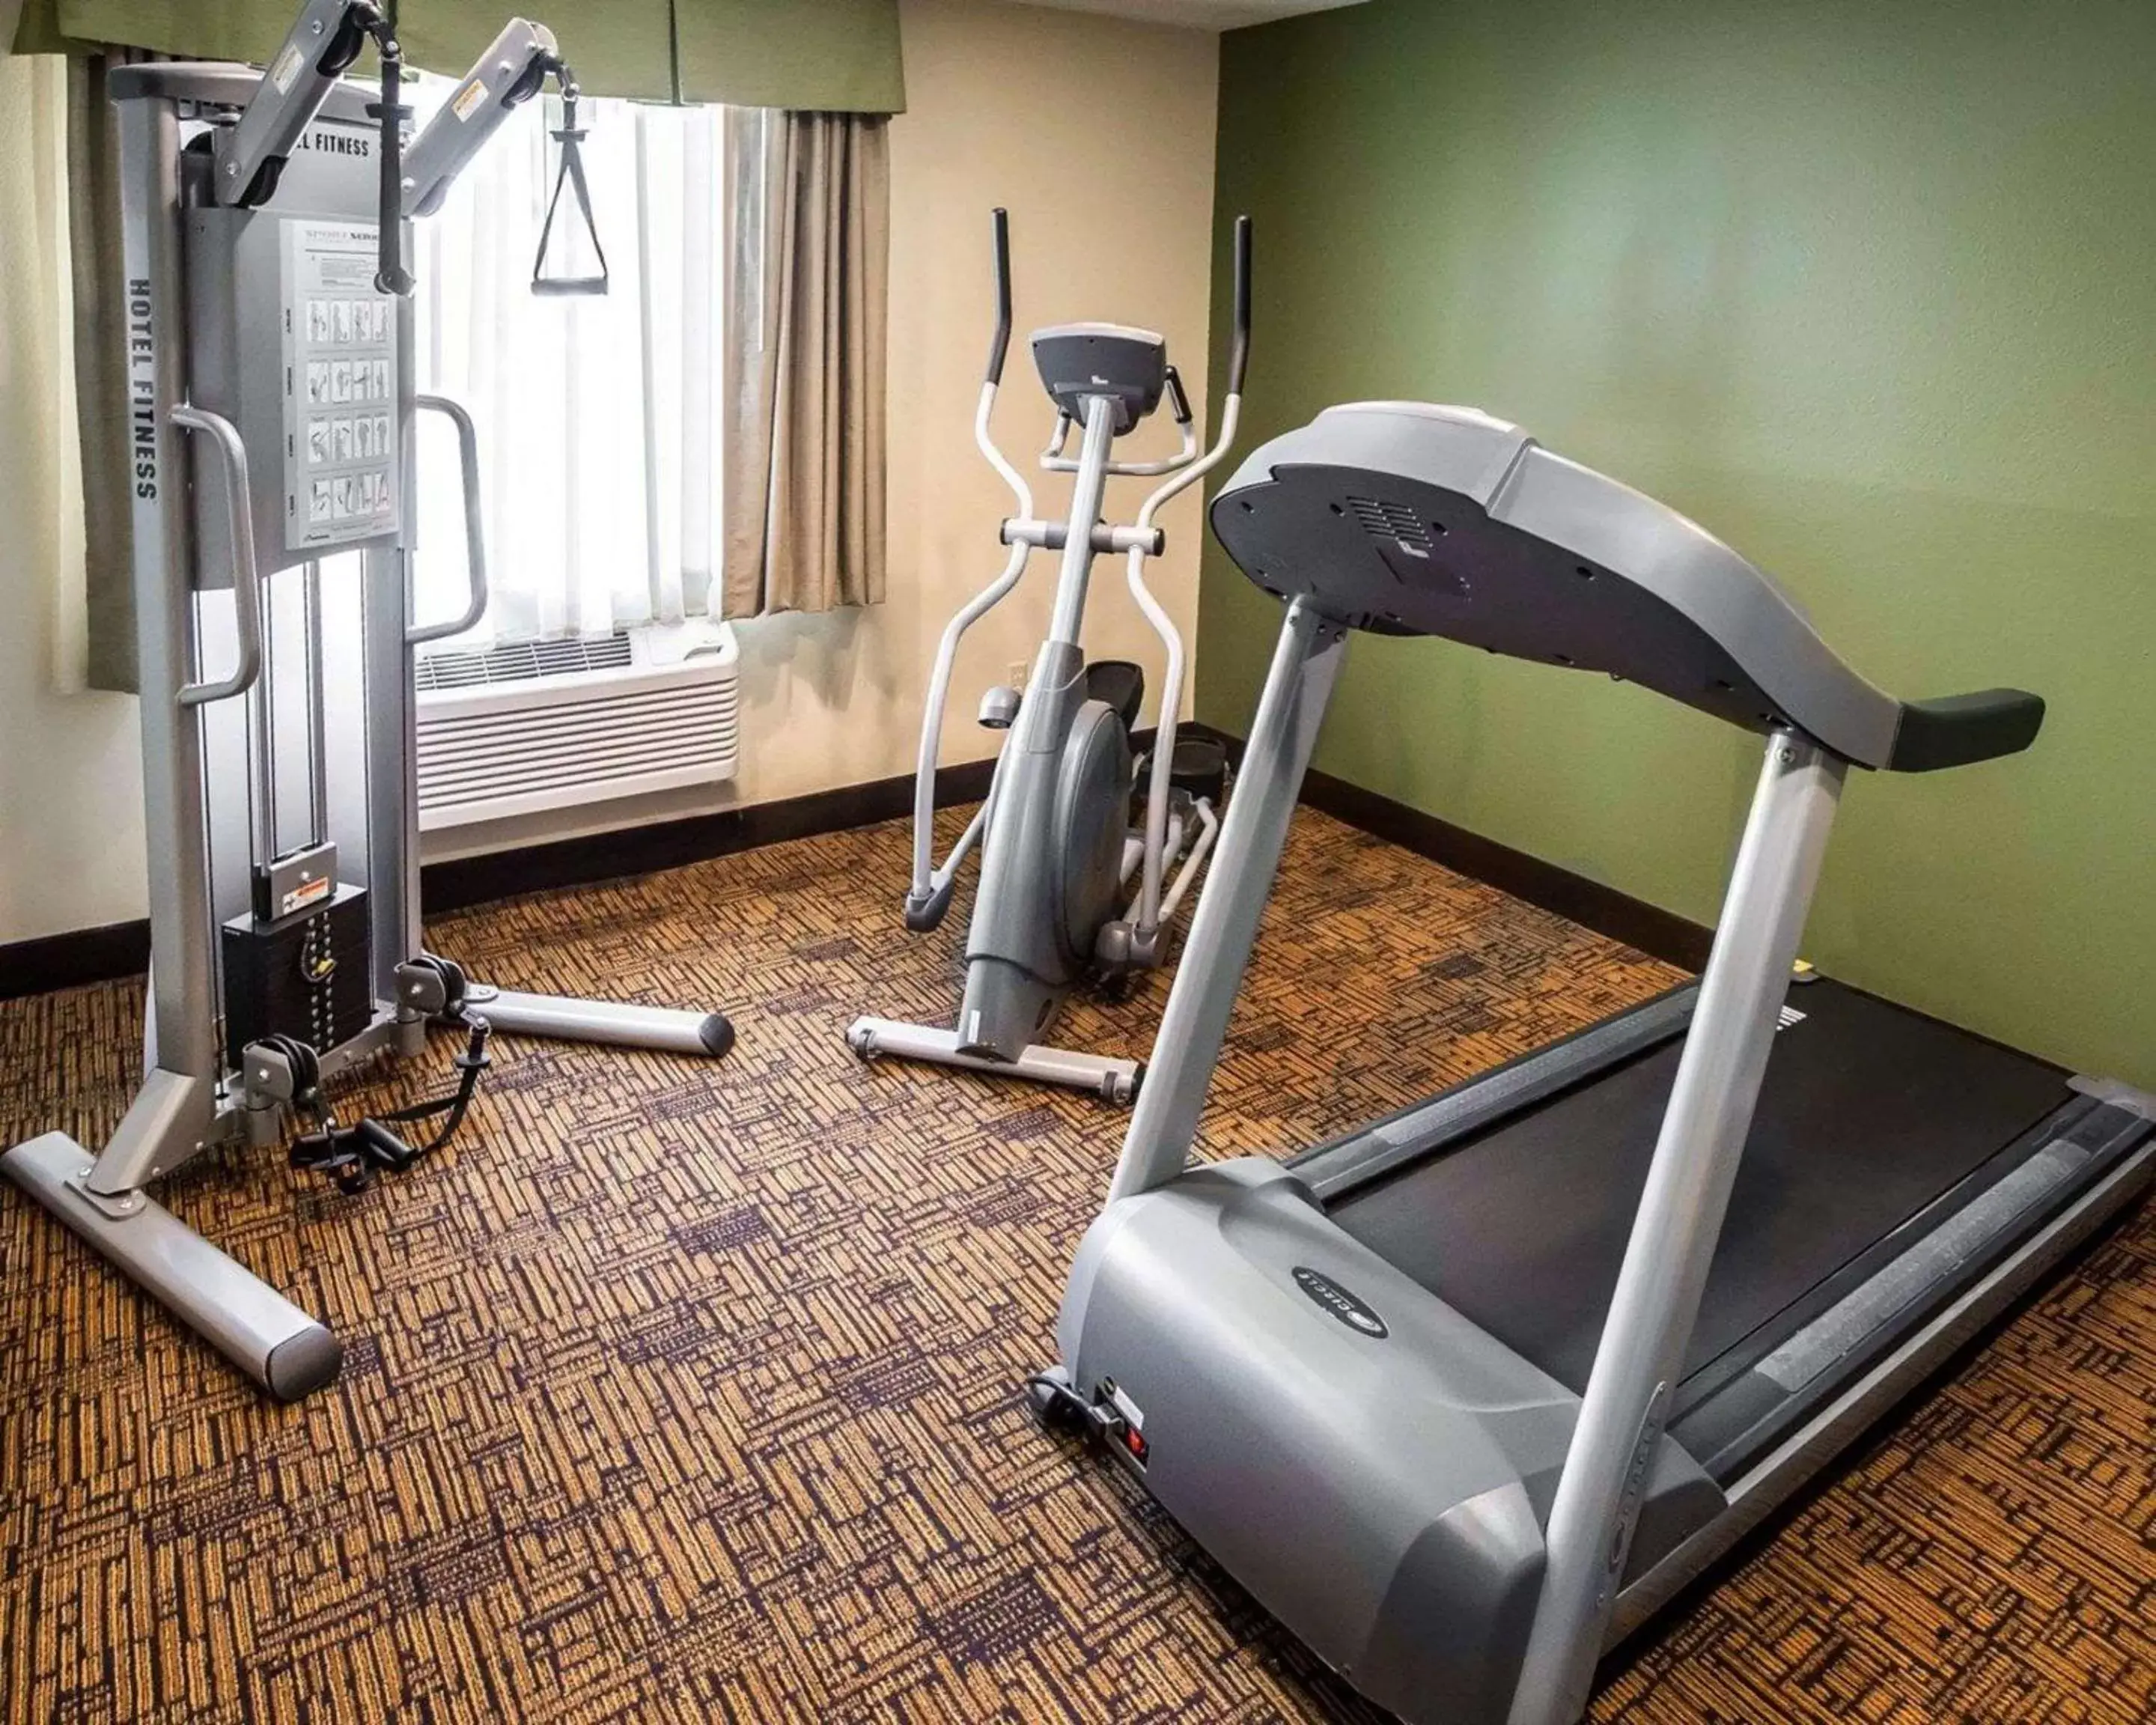 Fitness centre/facilities, Fitness Center/Facilities in Quality Inn Chesterton near Indiana Dunes National Park I-94